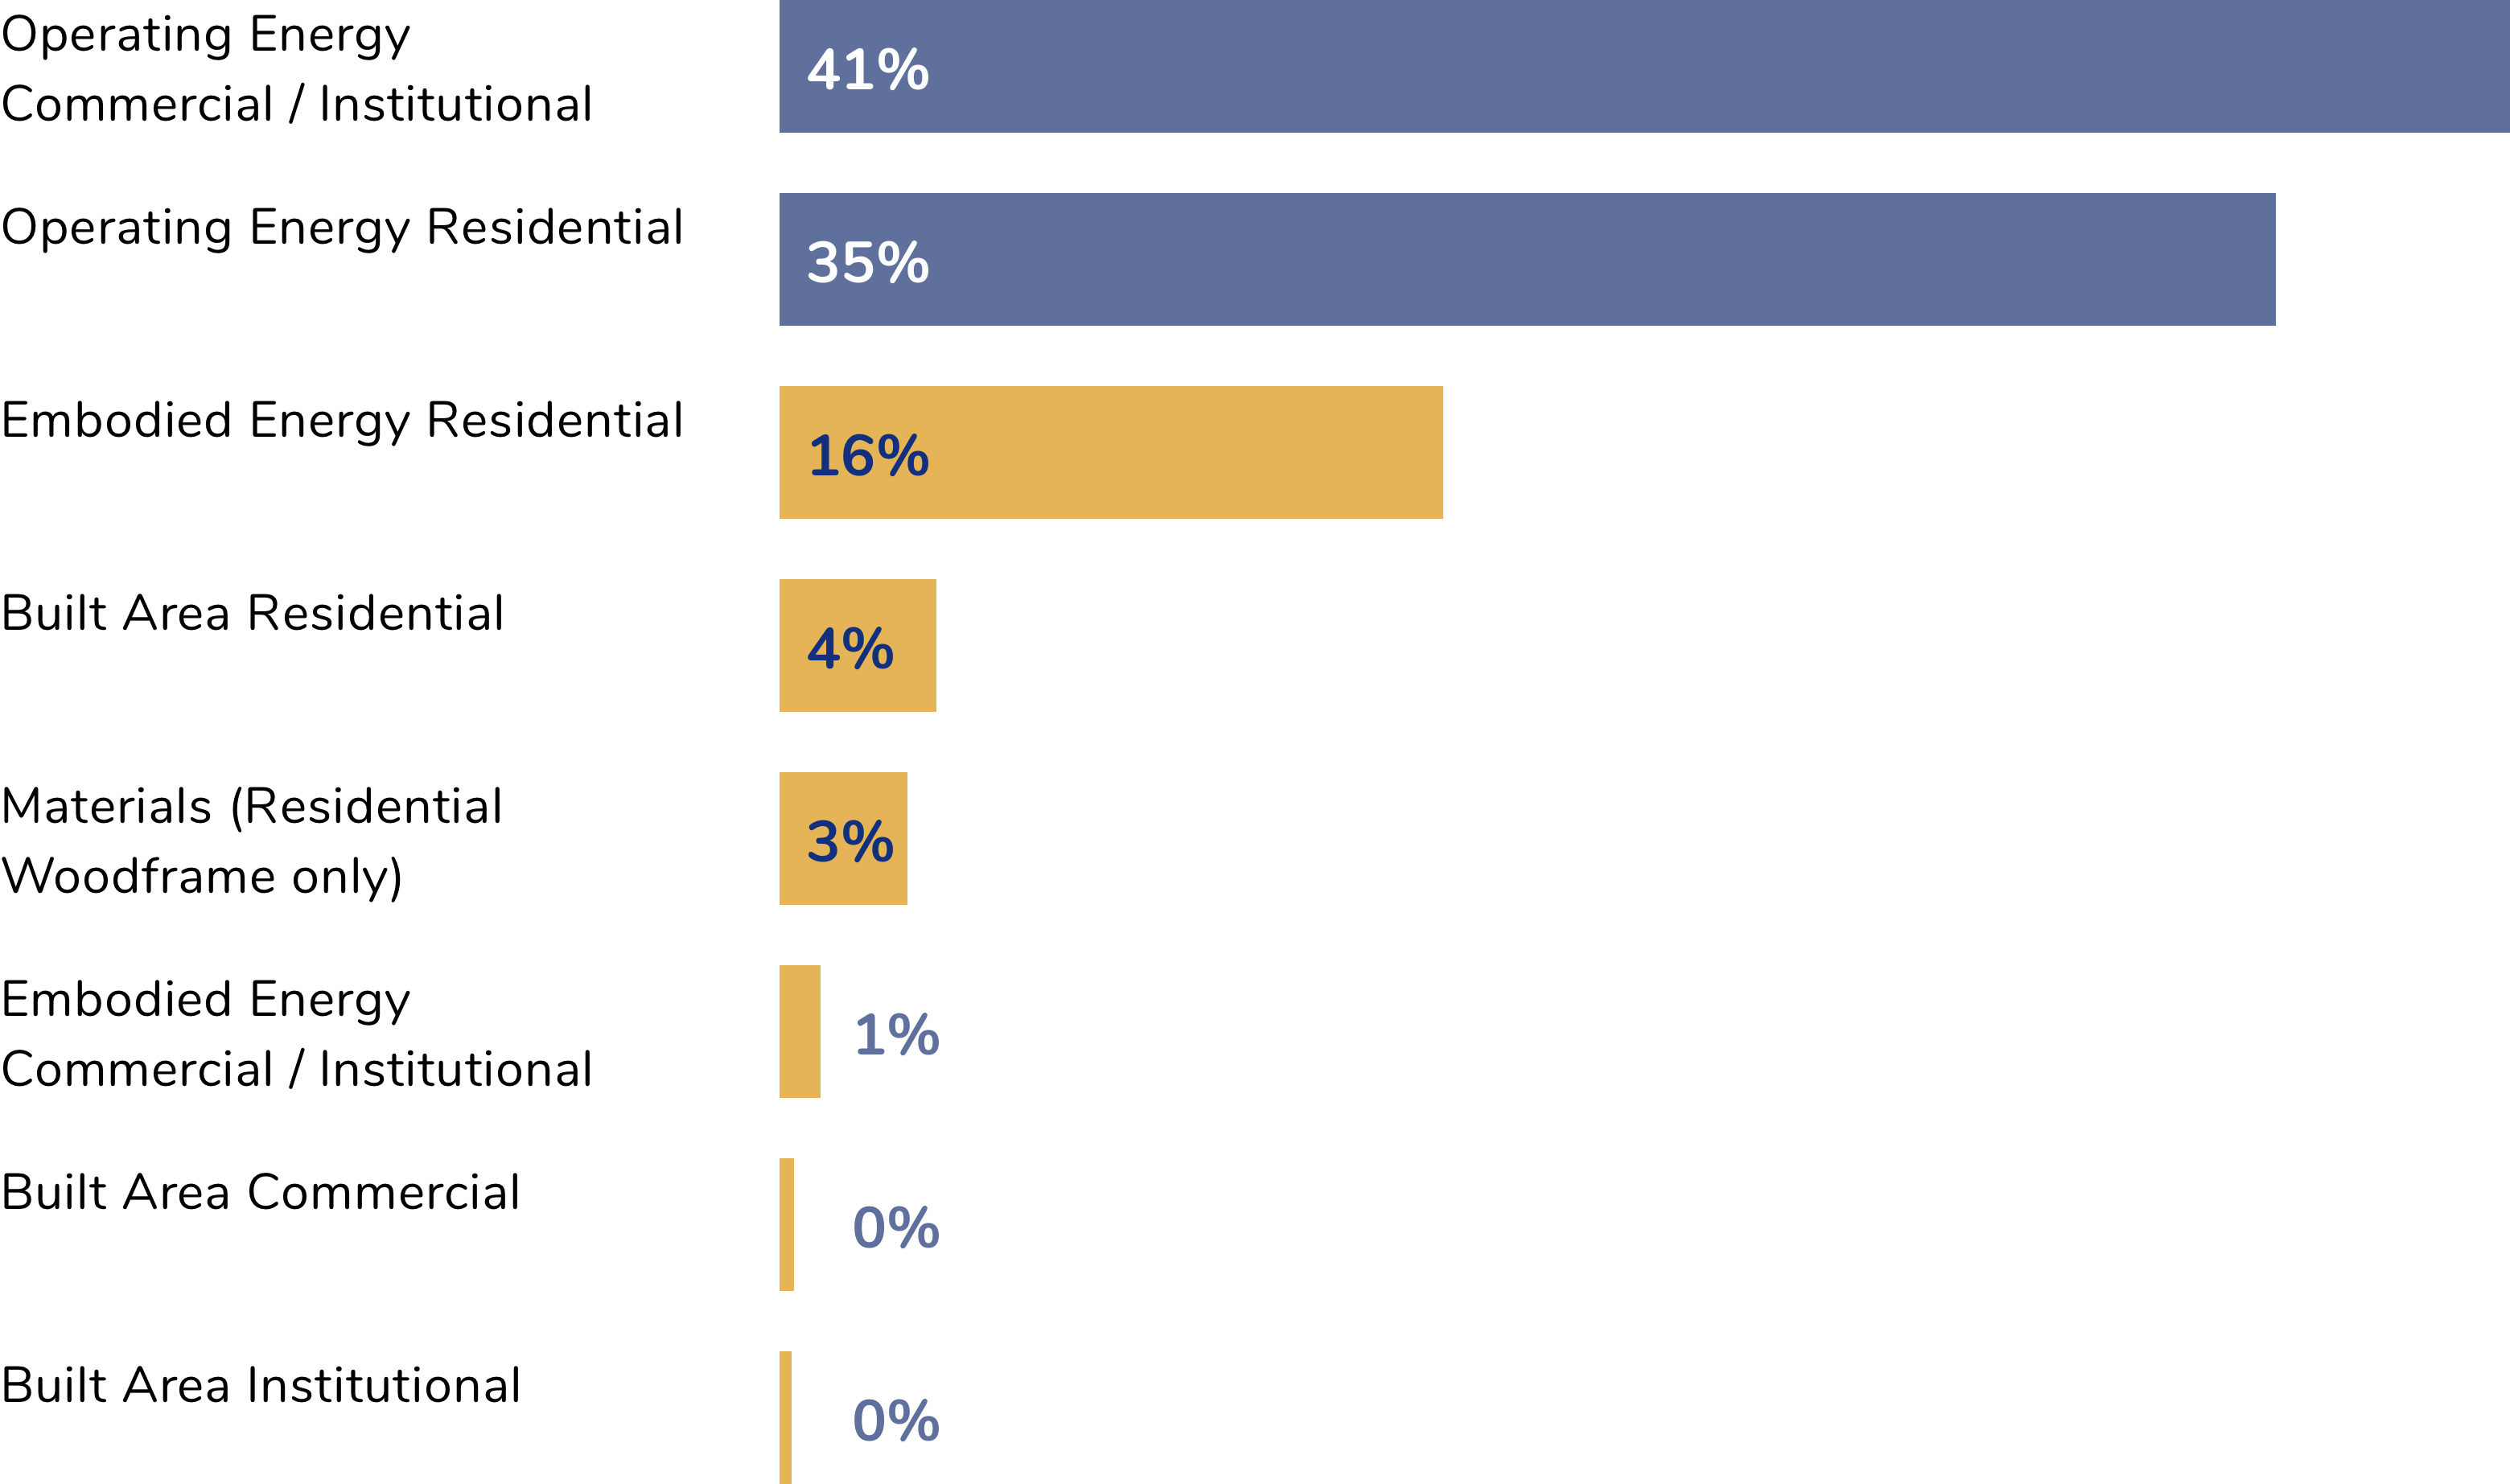 Horizontal bar graph showing building footprint breakdown
            by categories, with two leading causes related to operating energy